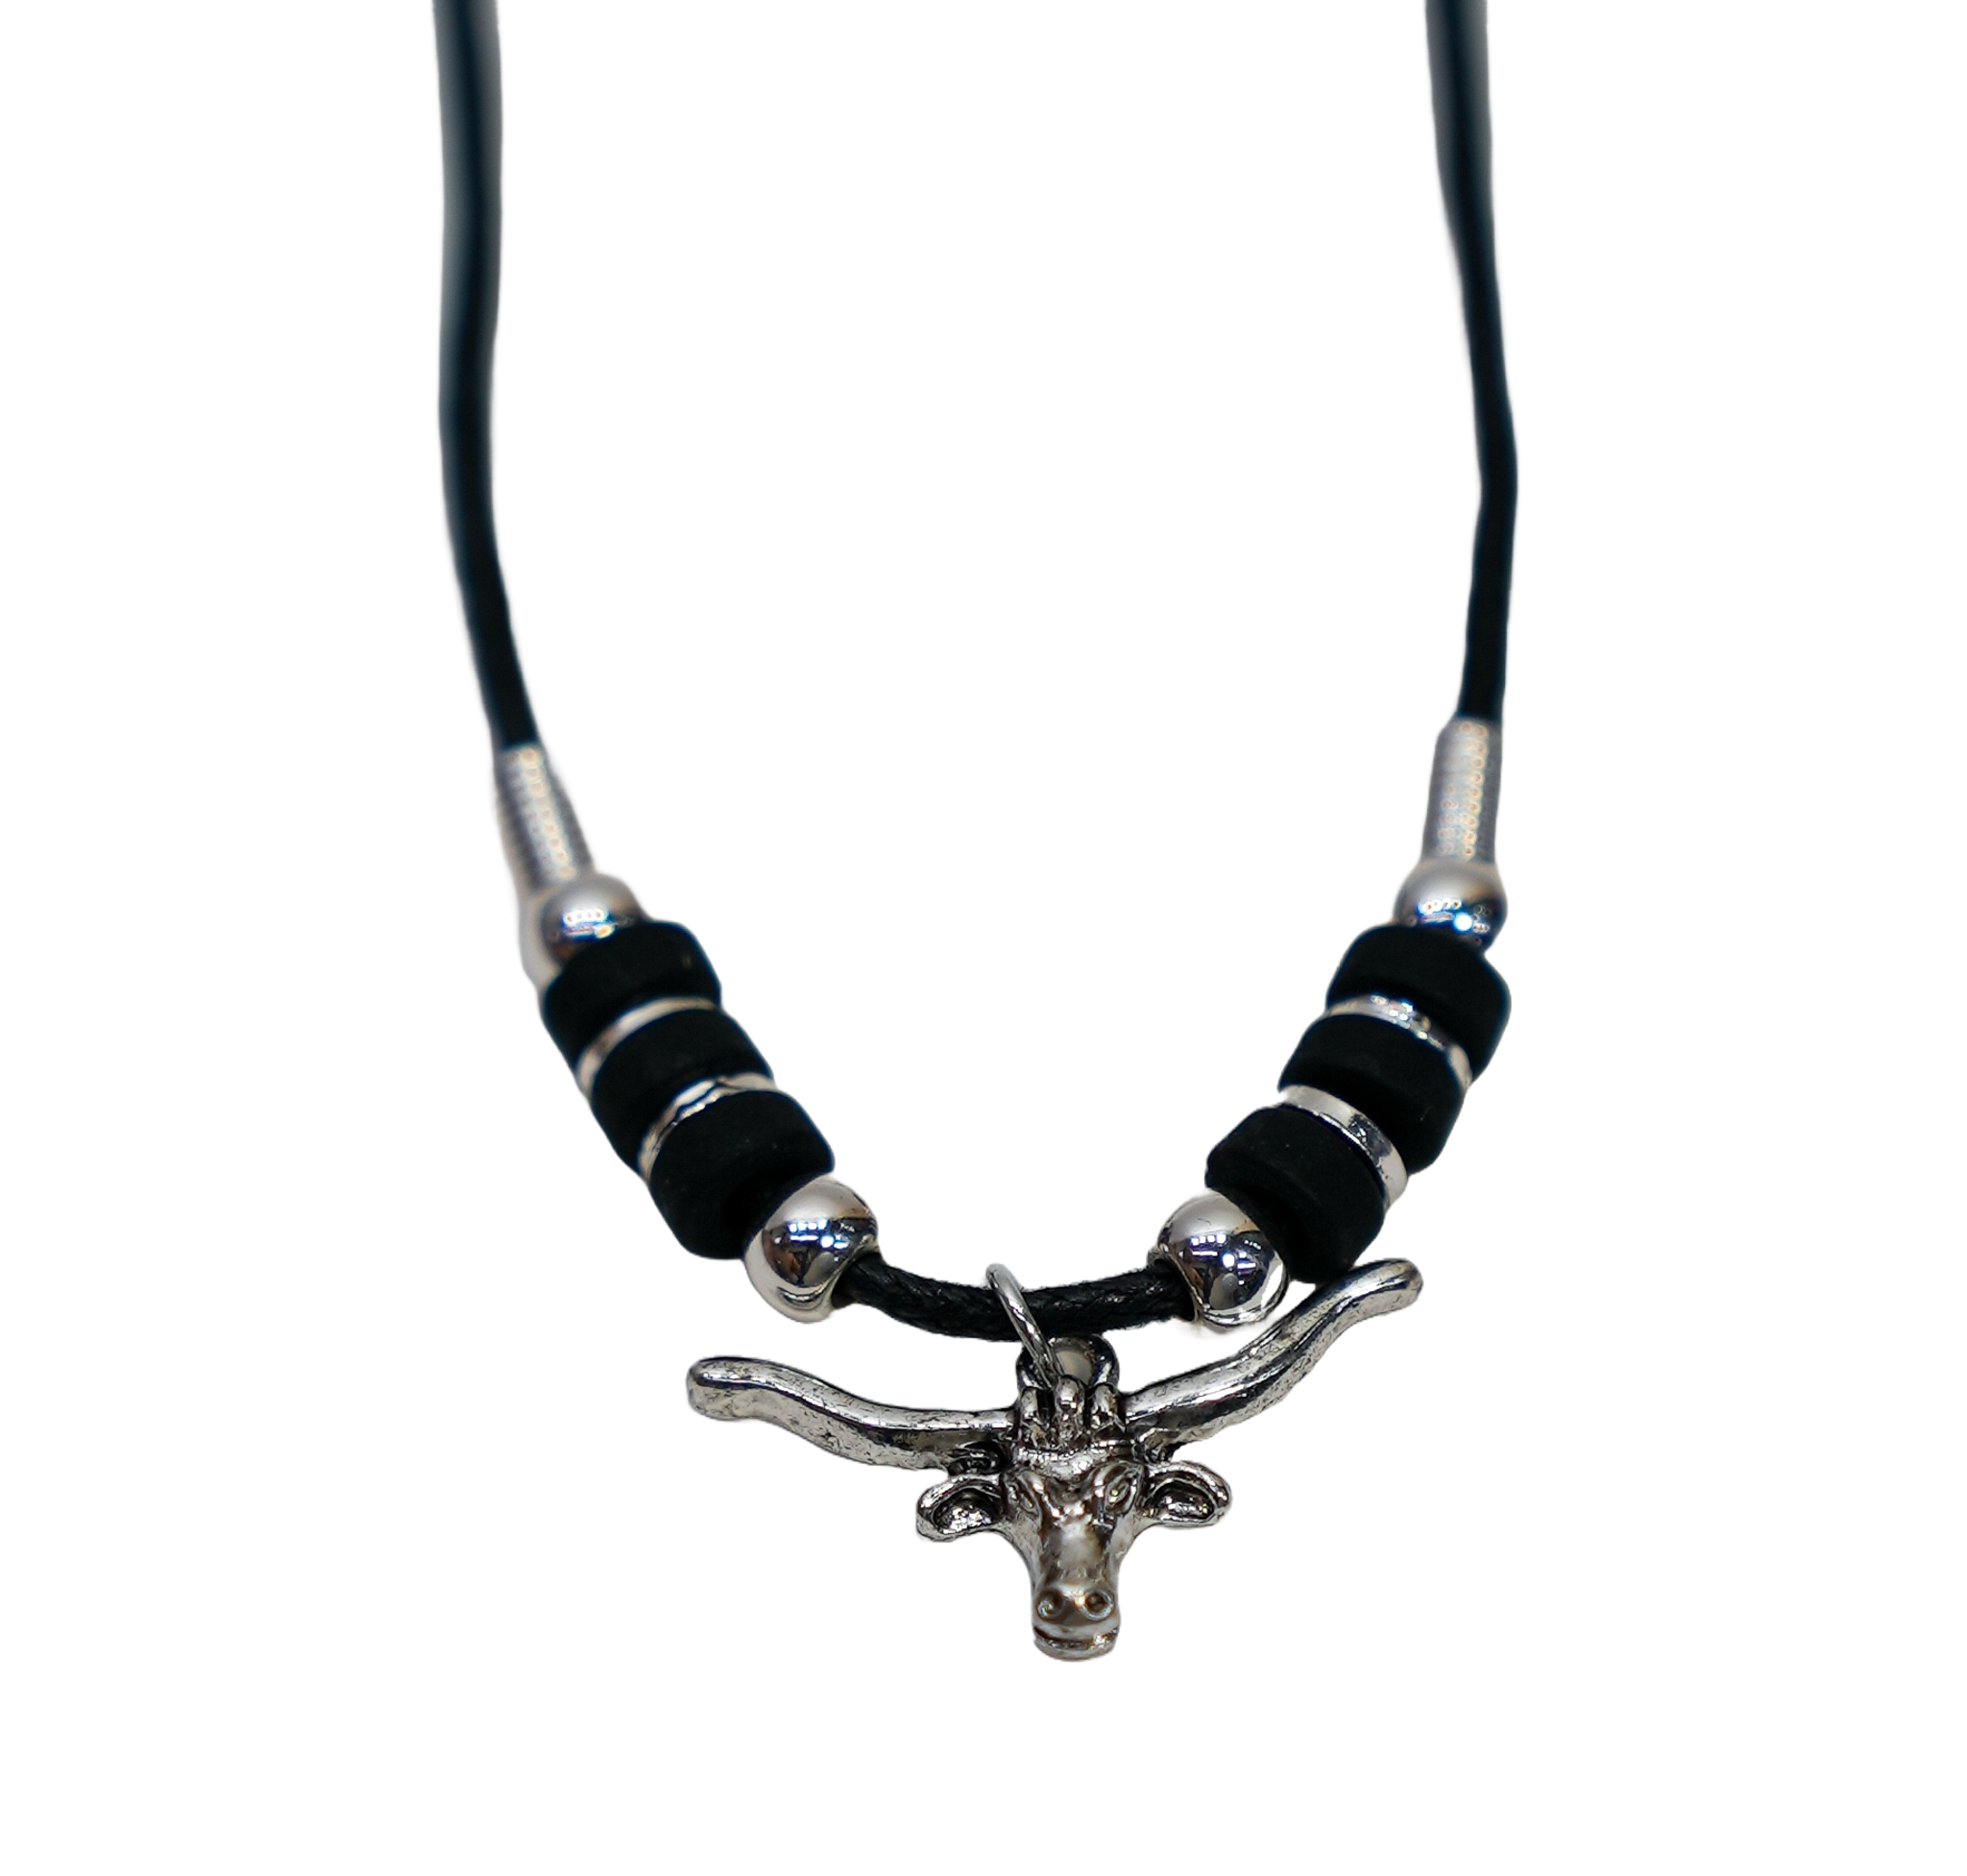 Necklace - adjustable black string with pendant, ace of spades with skull |  Jewellery Eshop EU